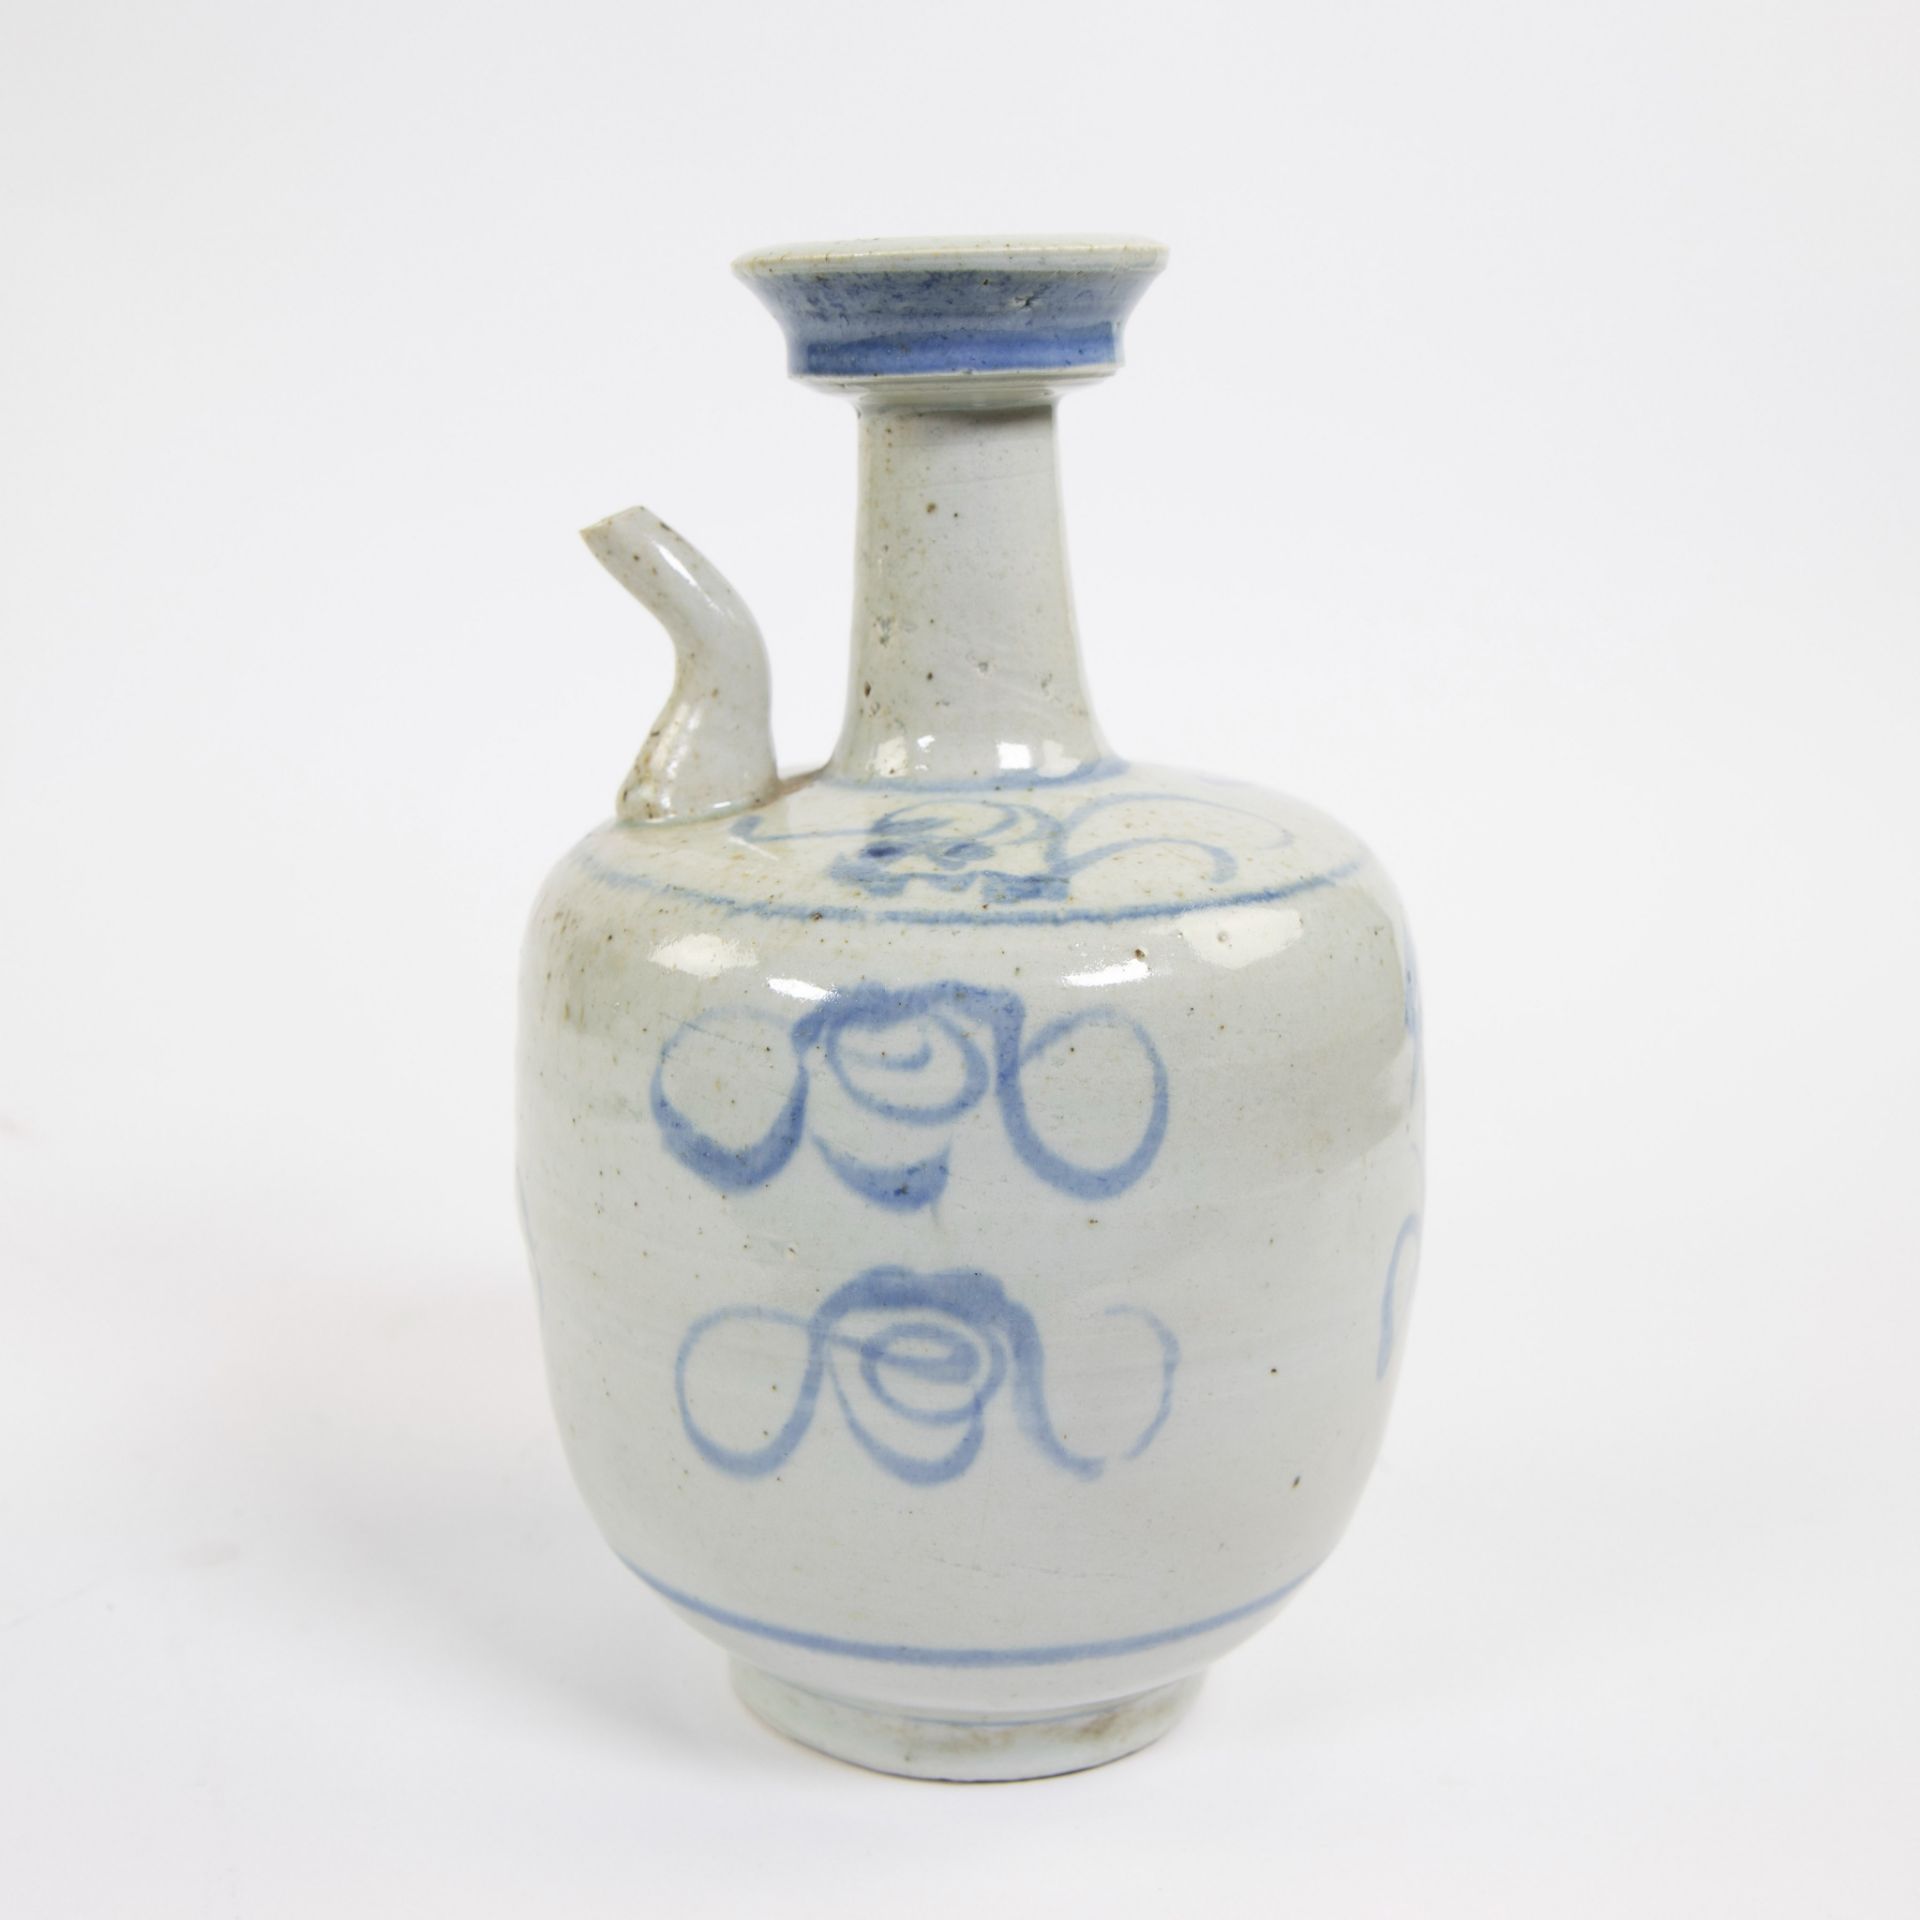 Pitcher or 'Kendi' in blue and white Chinese porcelain, Ming dynasty